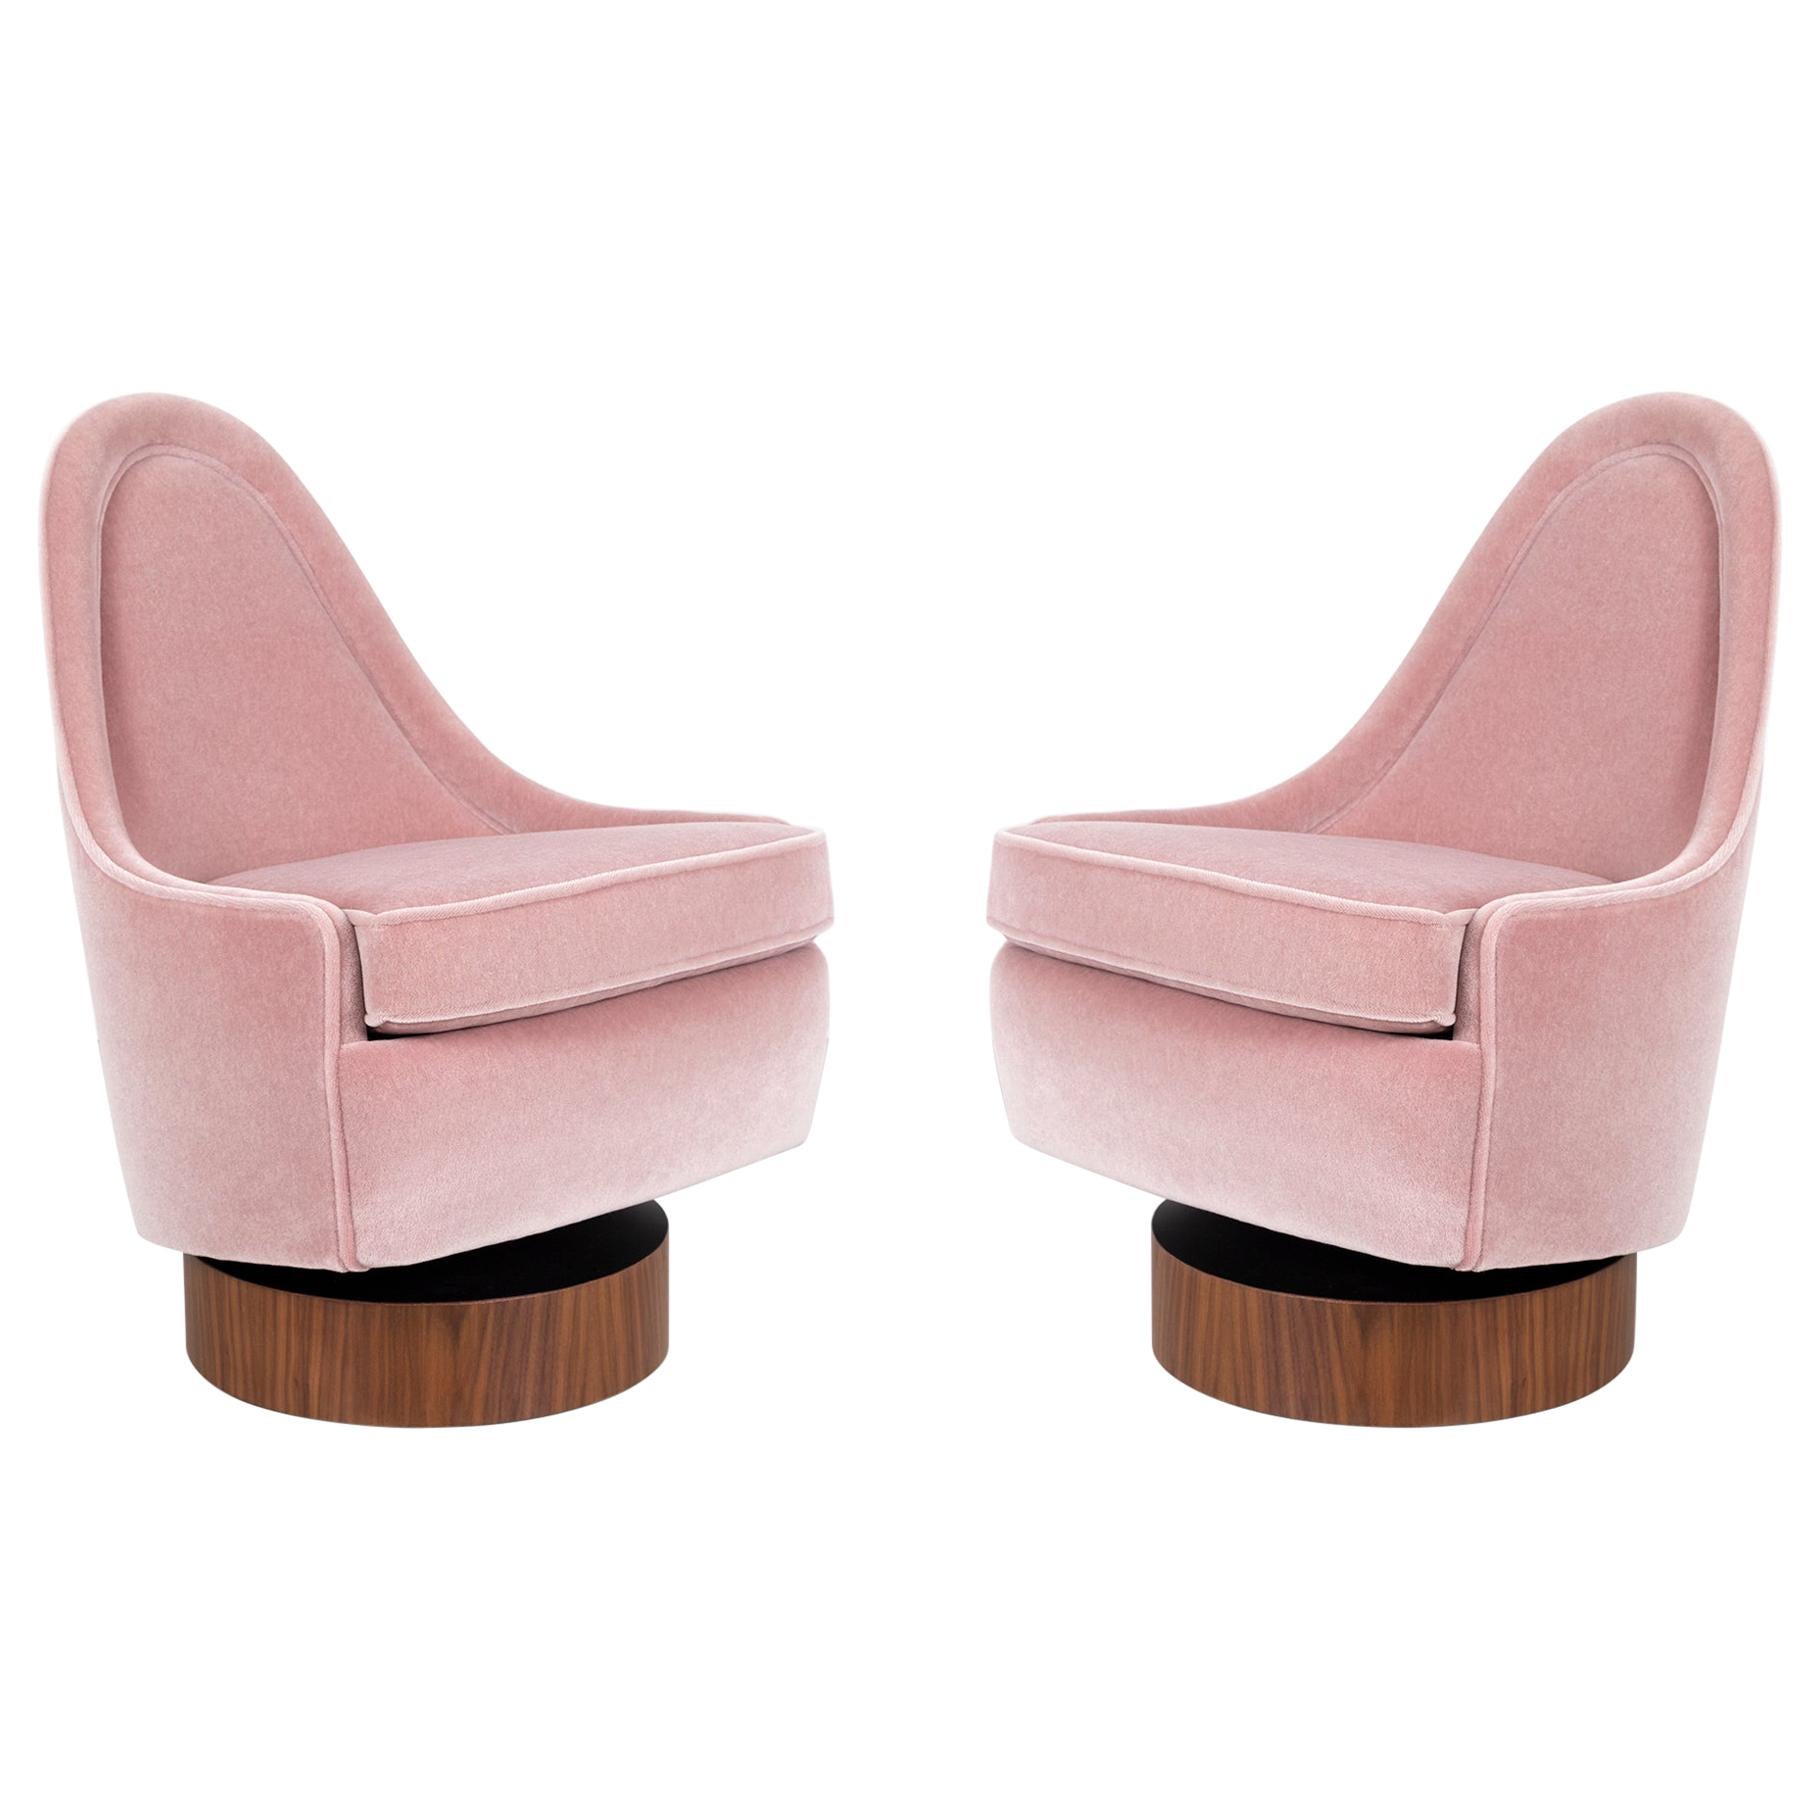 Milo Baughman Child's Size Swivel Chairs For Sale